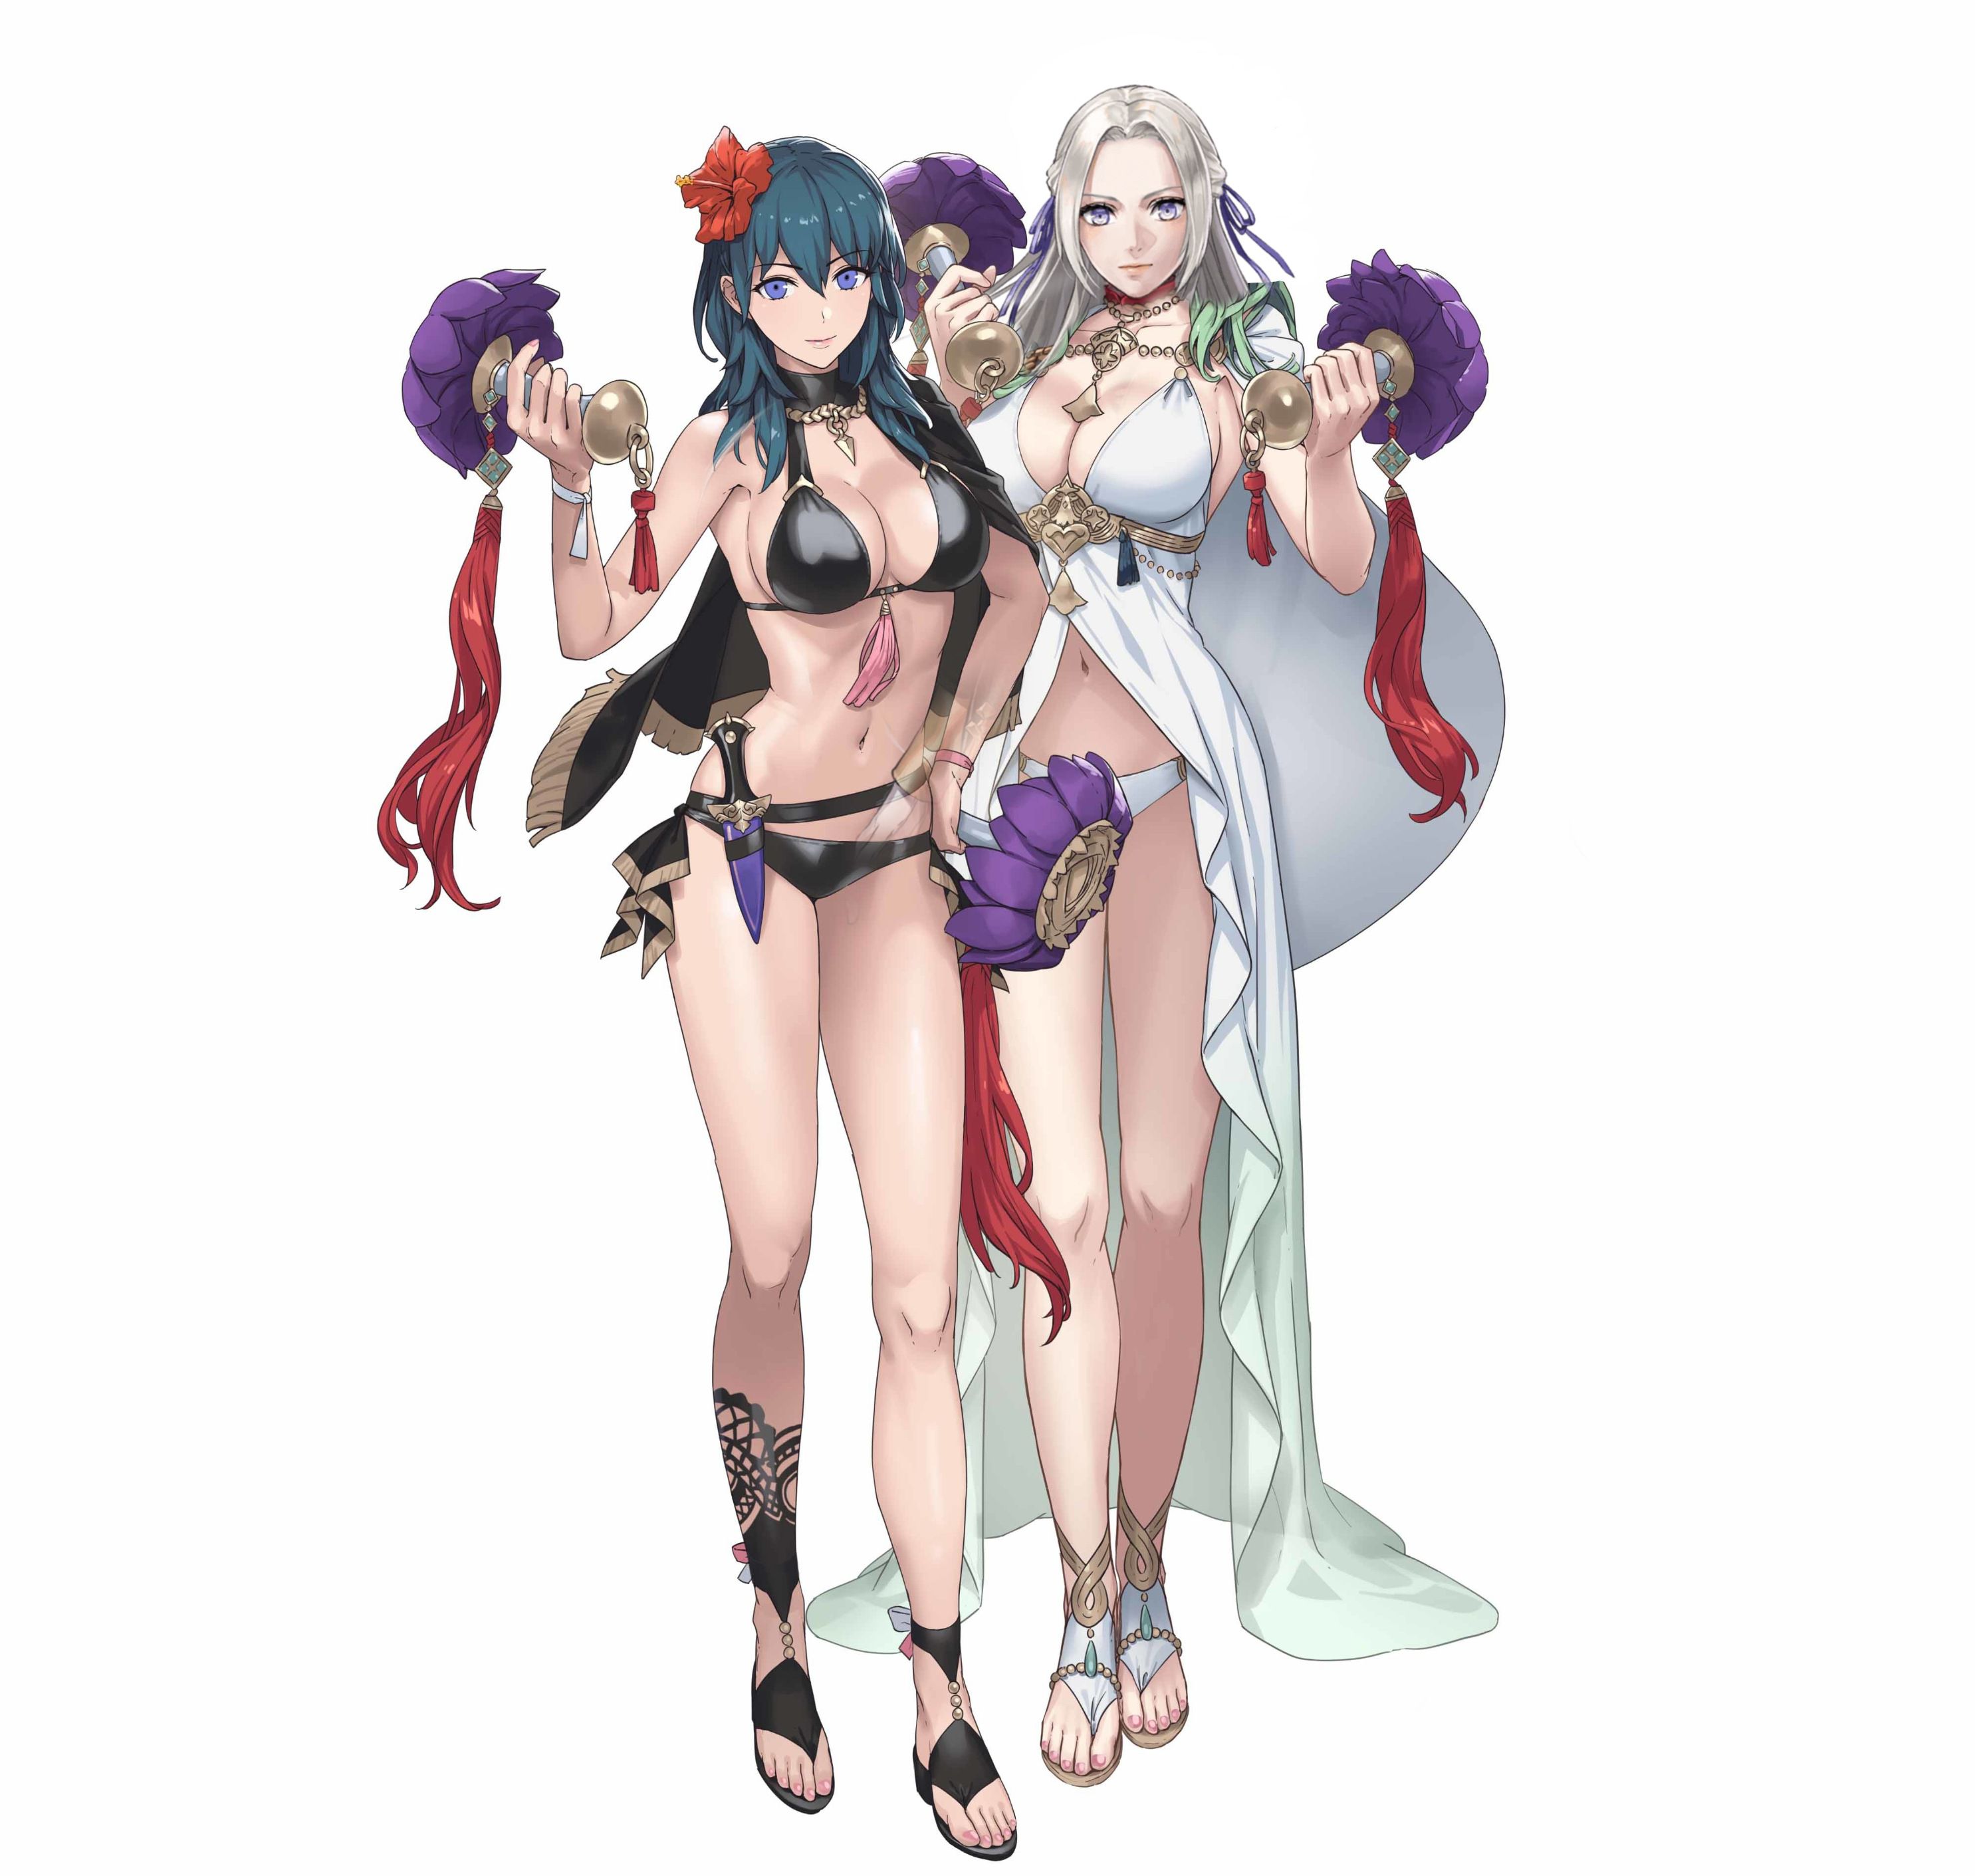 [Sad news] Fire Emblem will release a figure that is too erotic 15